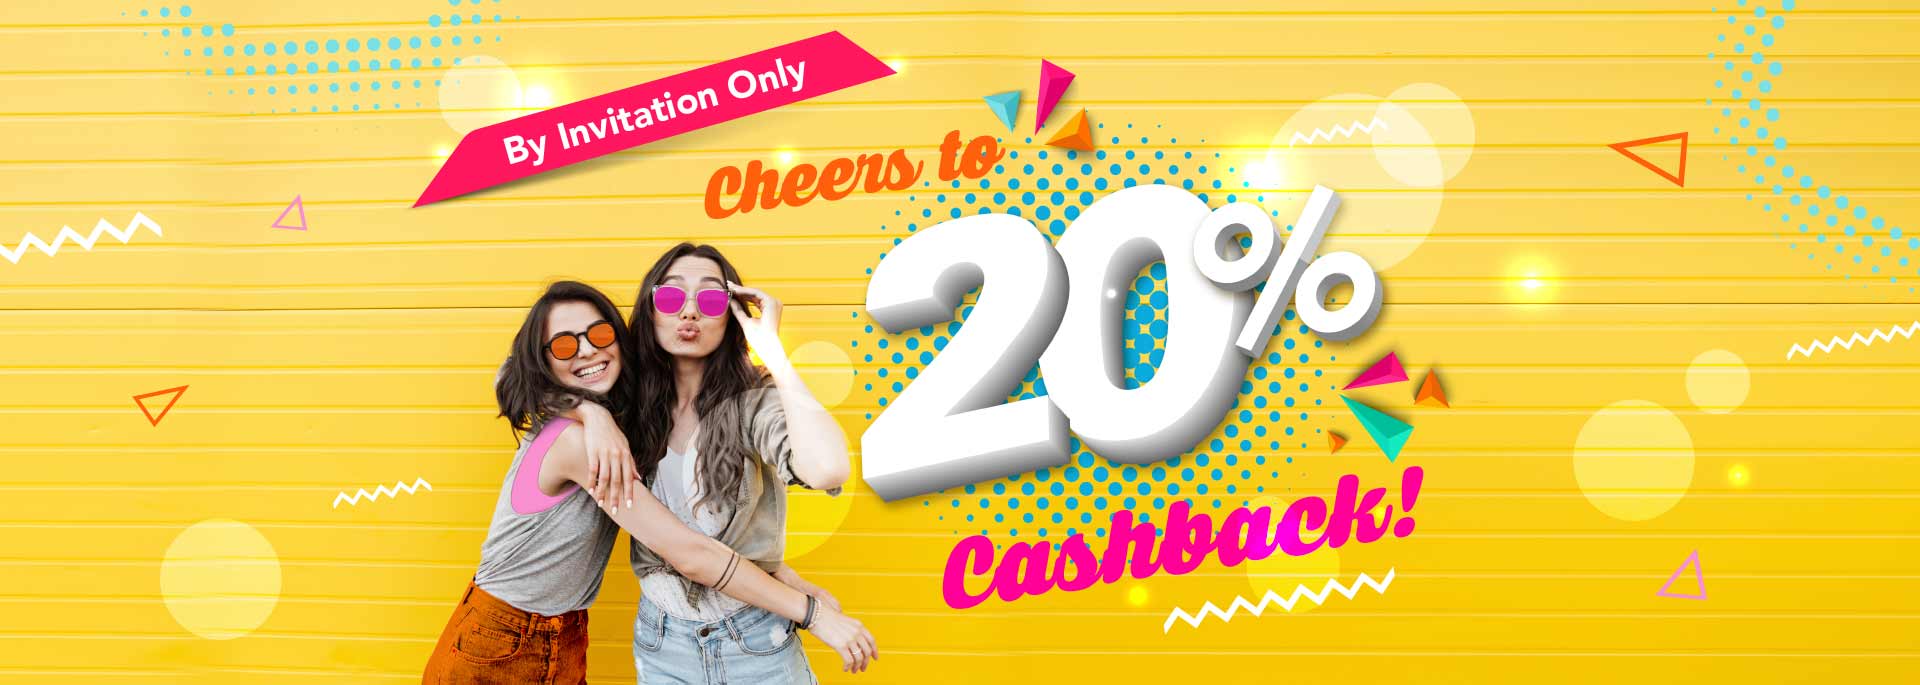 Promotions | Winner listing 20% cashback. Congratulations to the winners!